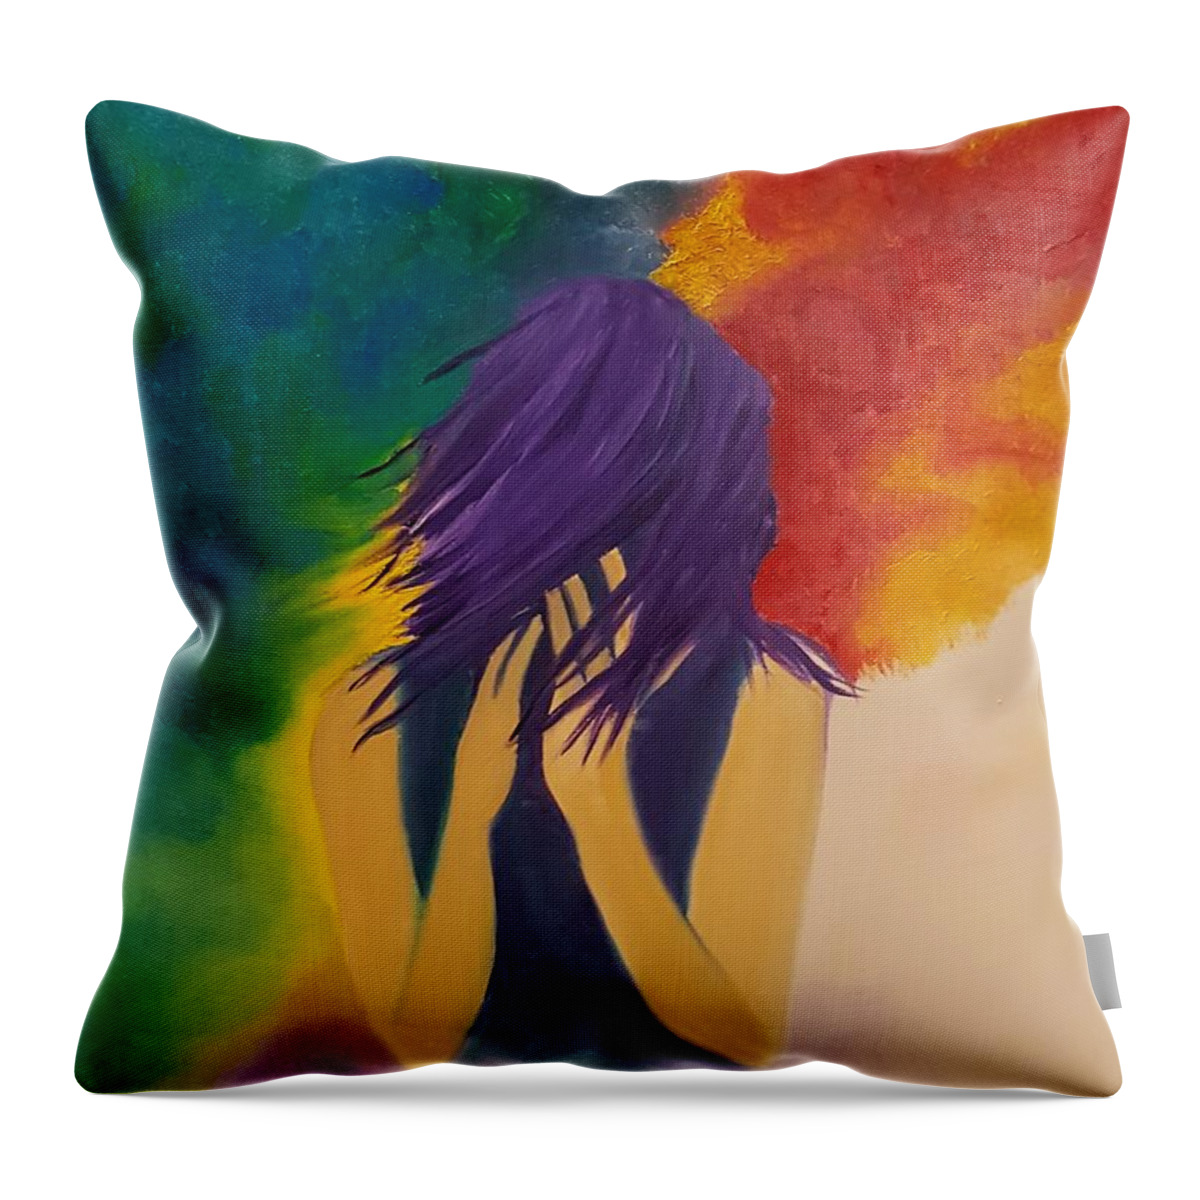 Me Too Throw Pillow featuring the painting Holding space by Kim Rahal